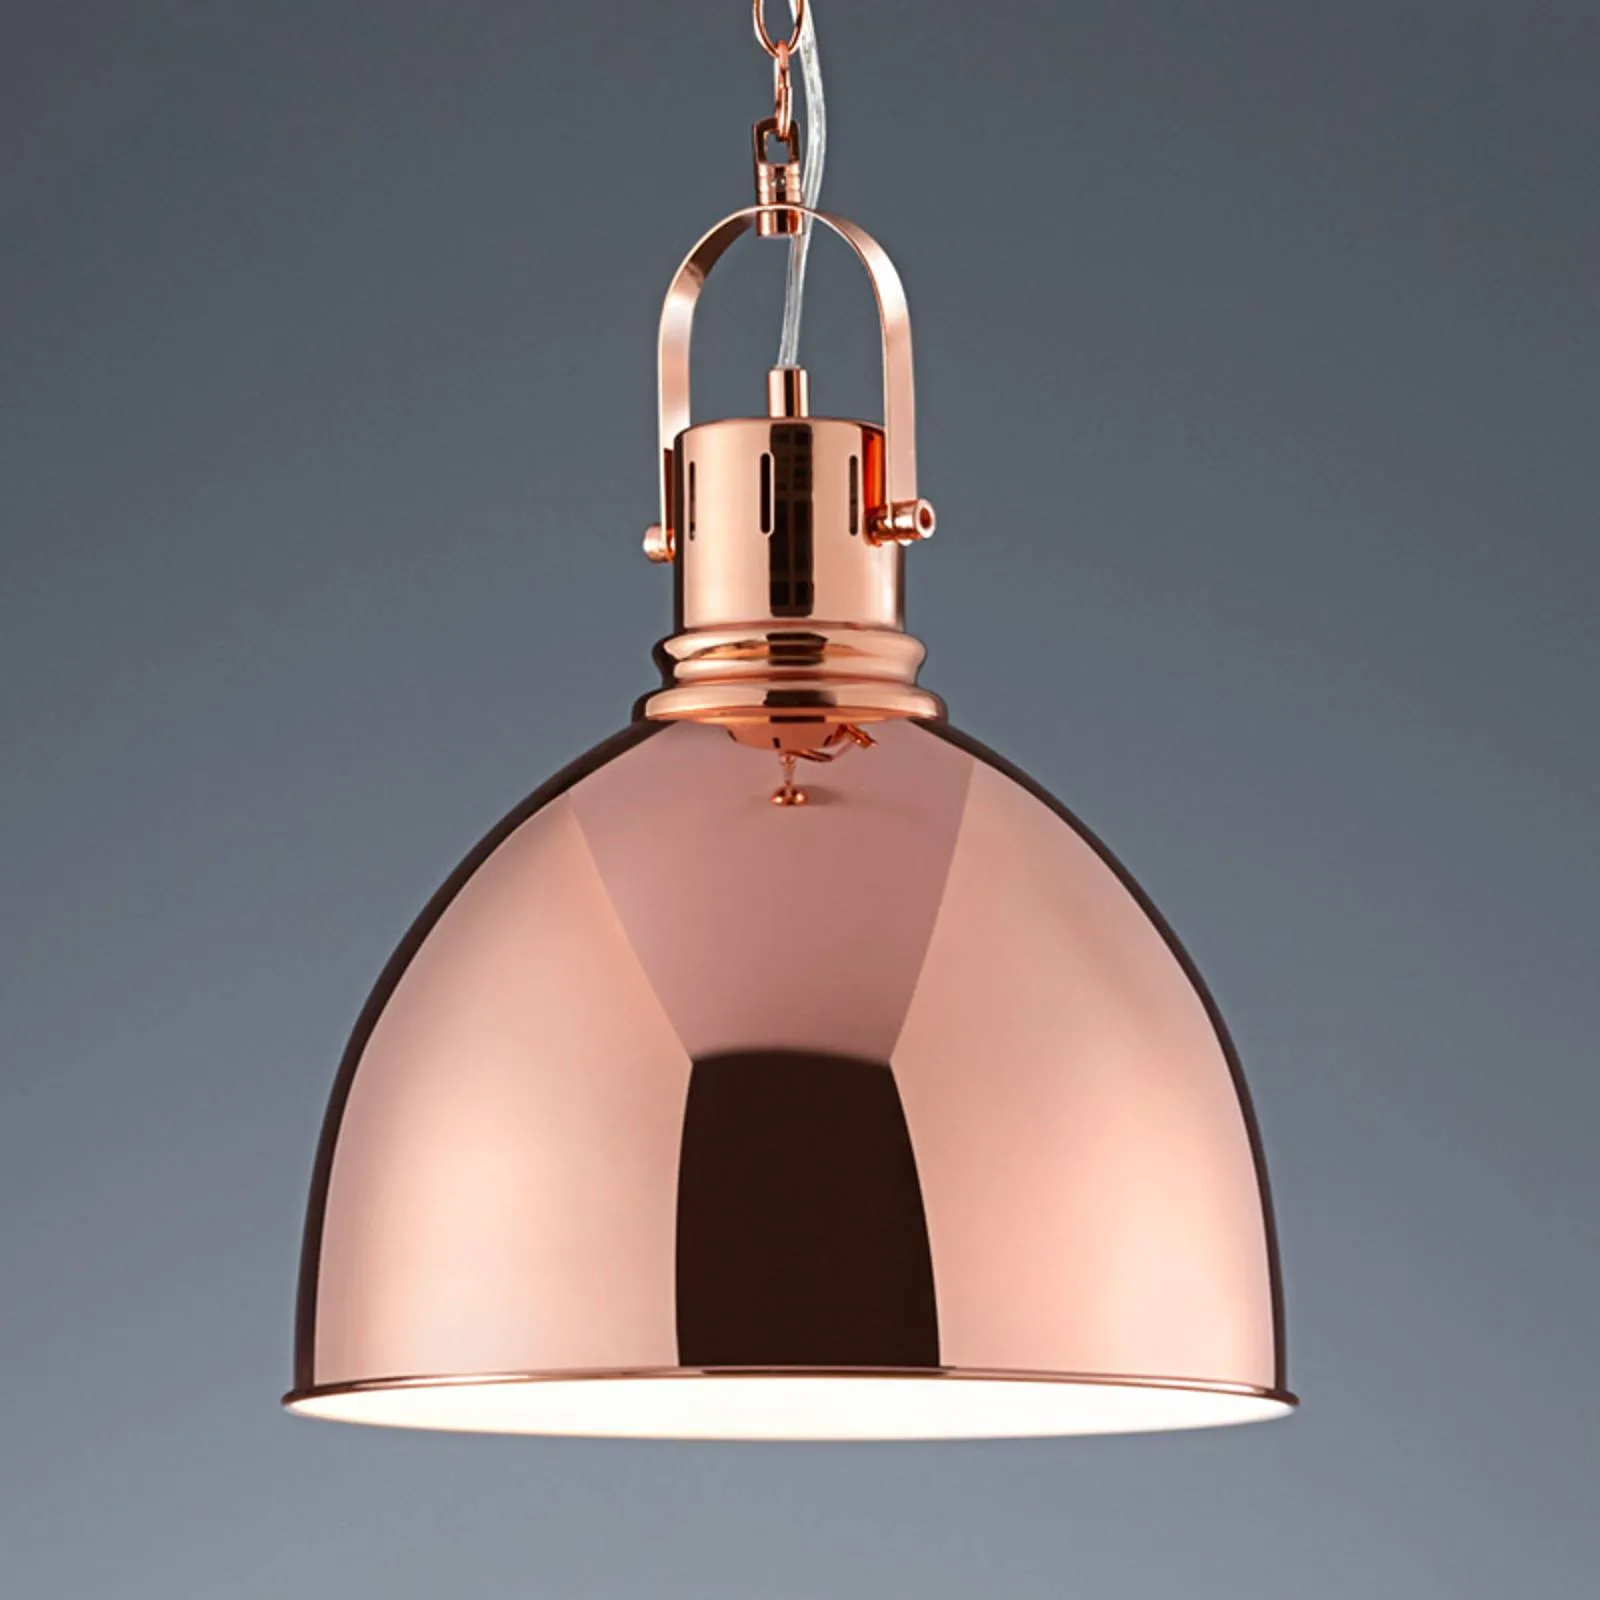 Tores hanging light, copper